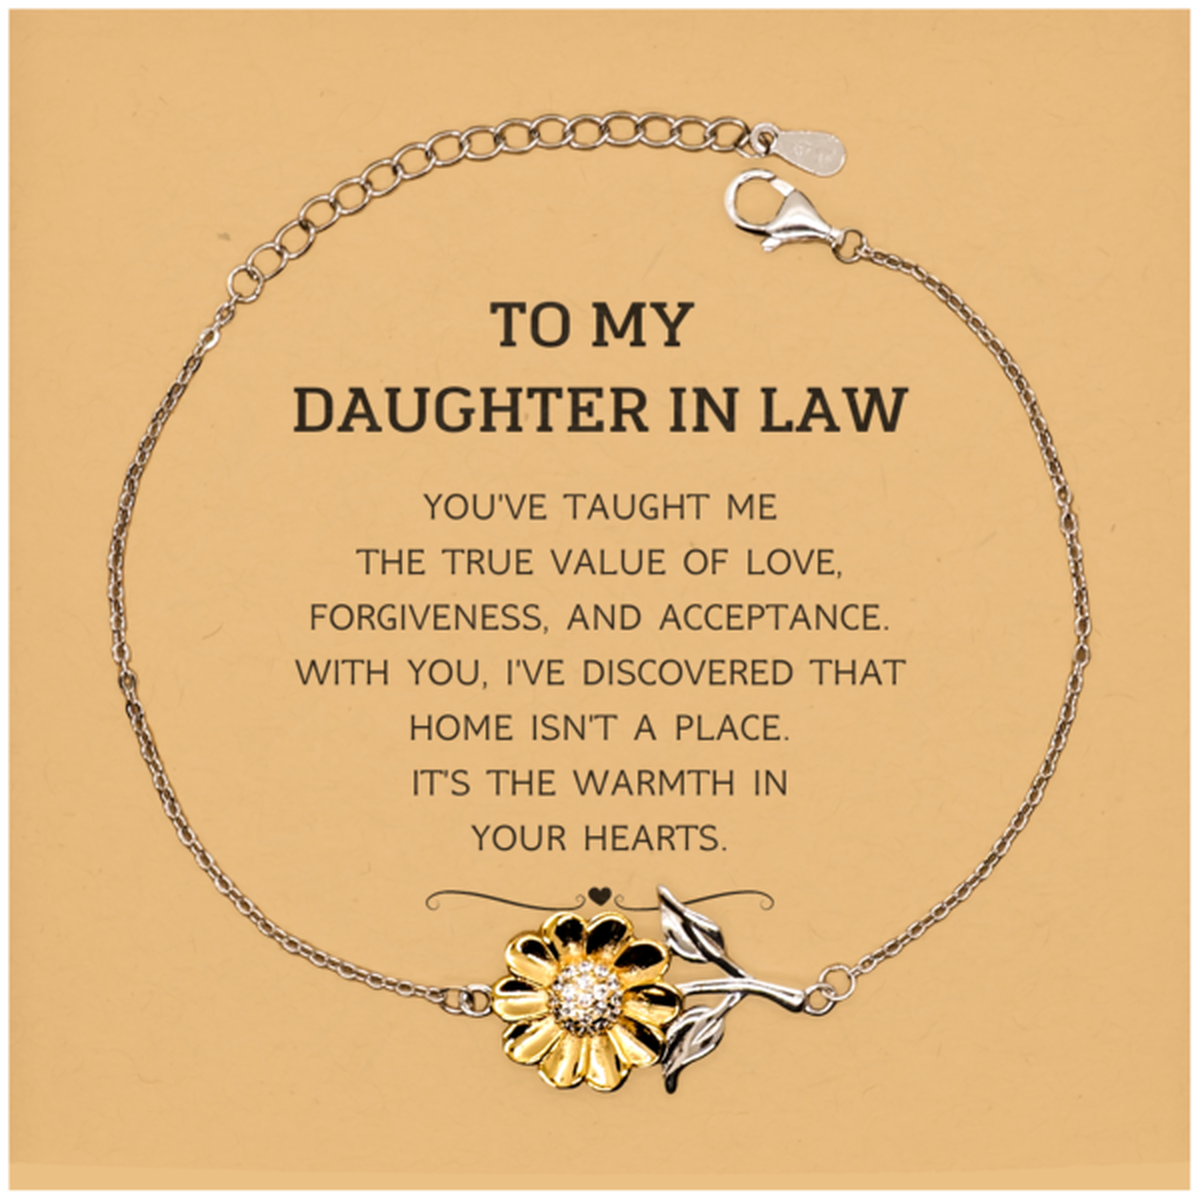 To My Daughter In Law Gifts, You've taught me the true value of love, Thank You Gifts For Daughter In Law, Birthday Christmas Sunflower Bracelet For Daughter In Law